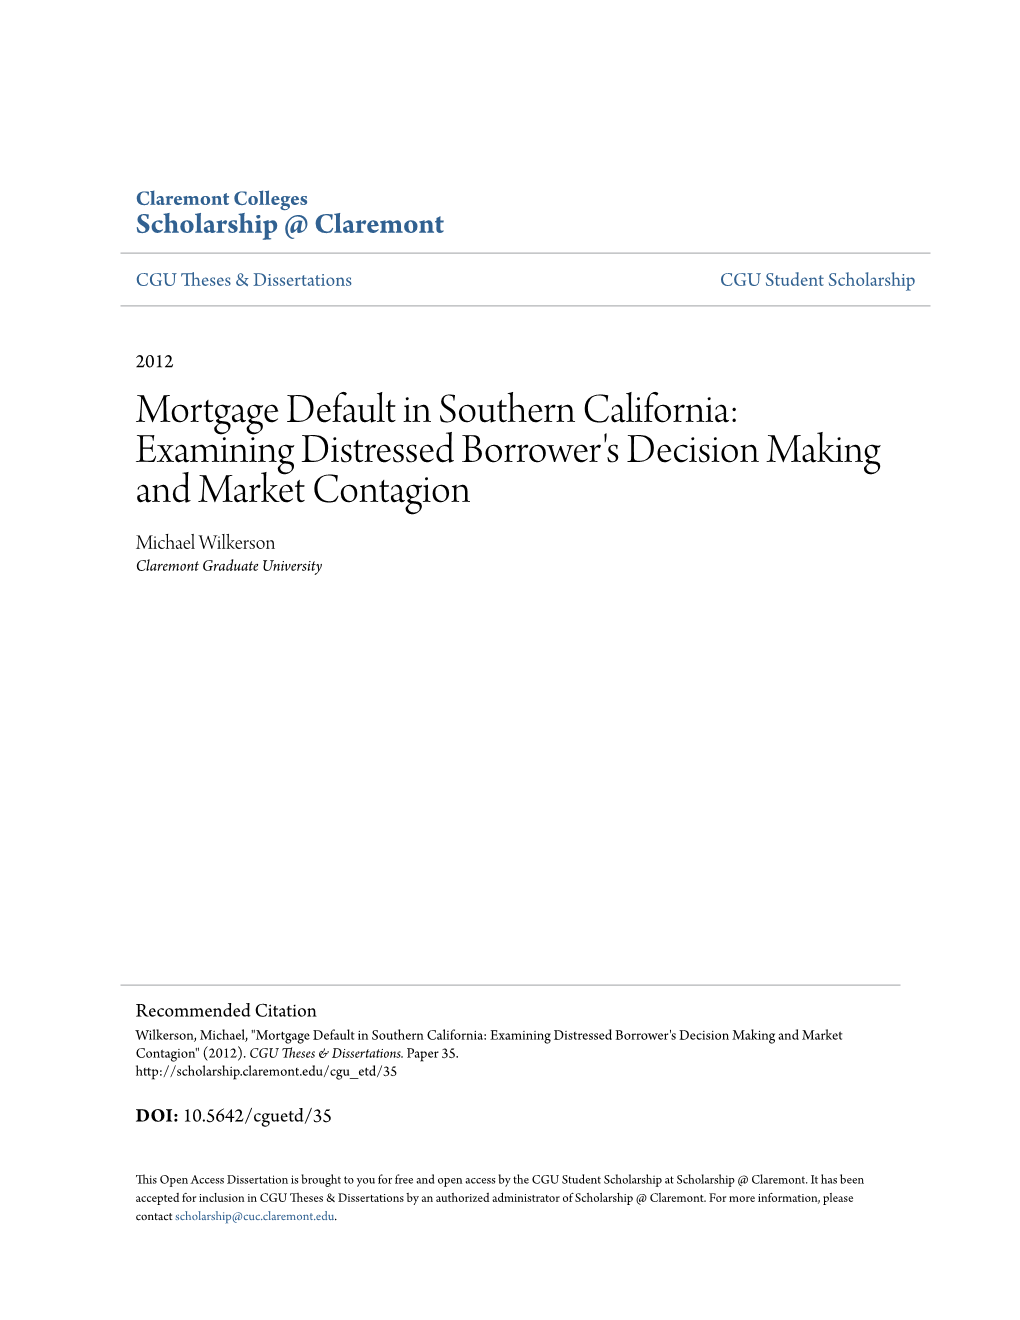 Mortgage Default in Southern California: Examining Distressed Borrower's Decision Making and Market Contagion Michael Wilkerson Claremont Graduate University